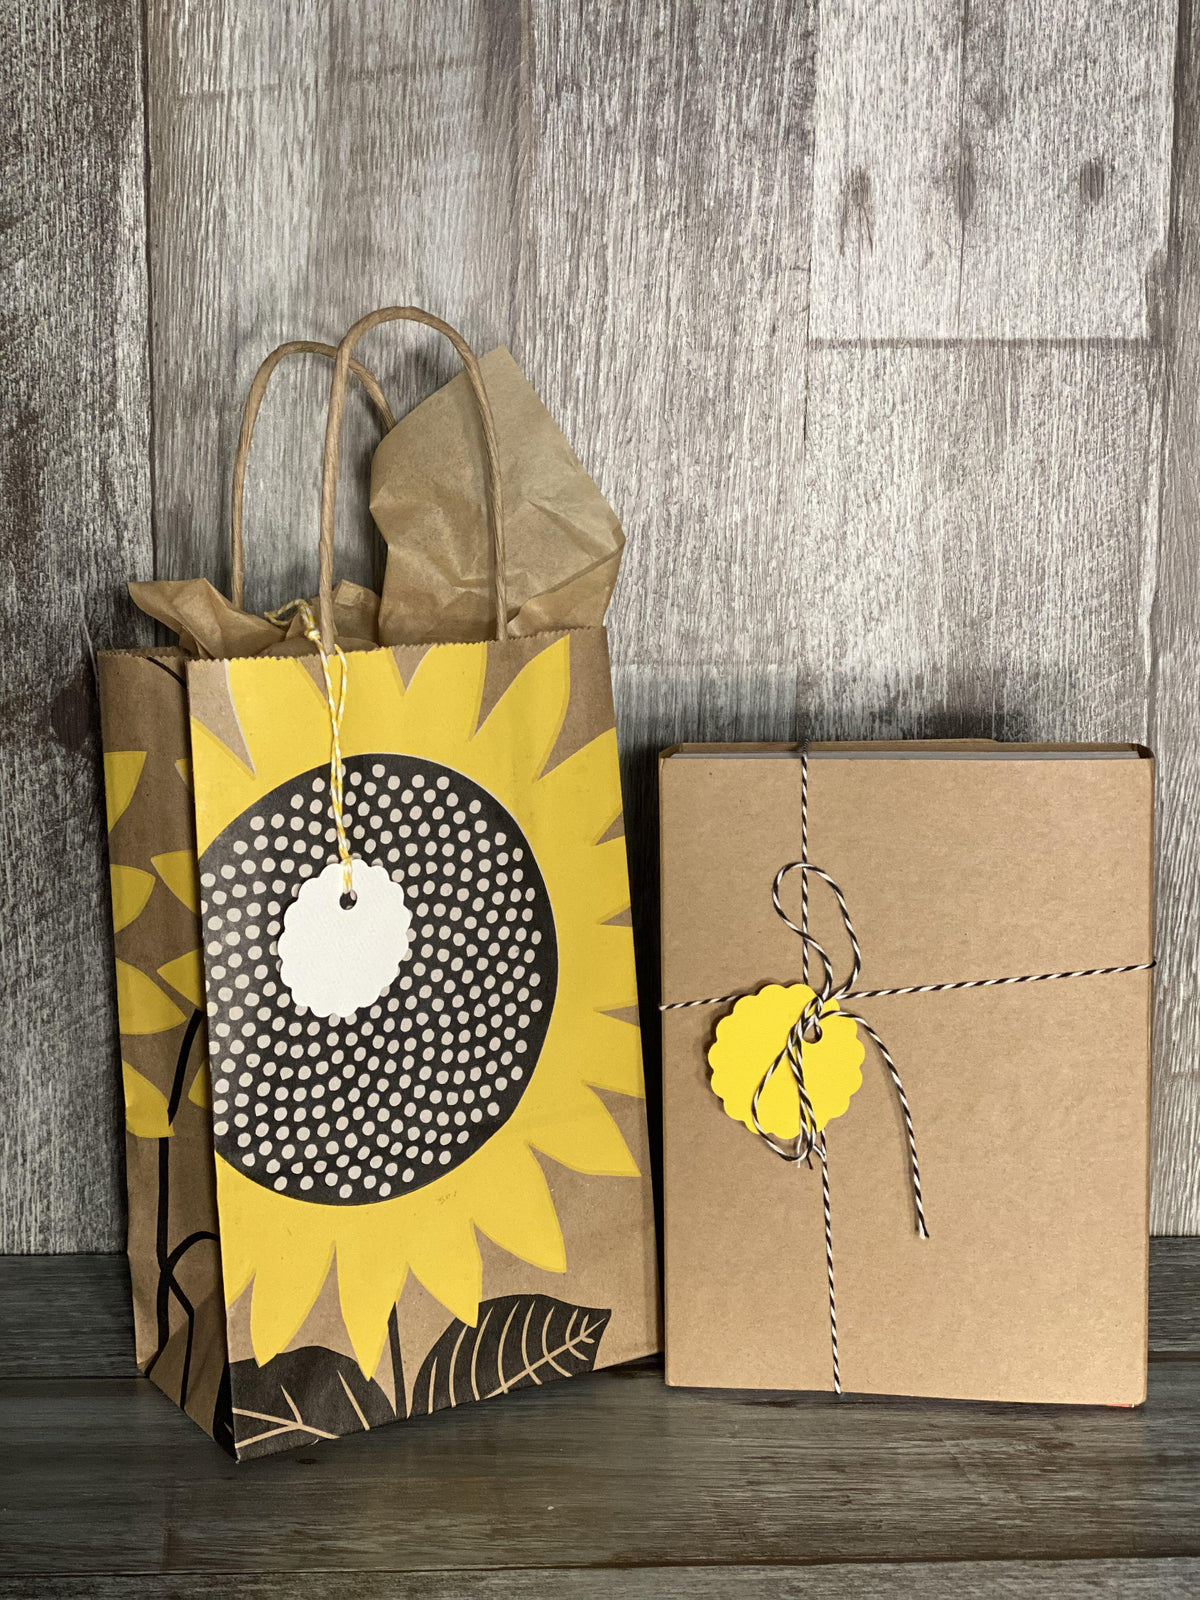 She's Crafty: Gift Bags for Christmas